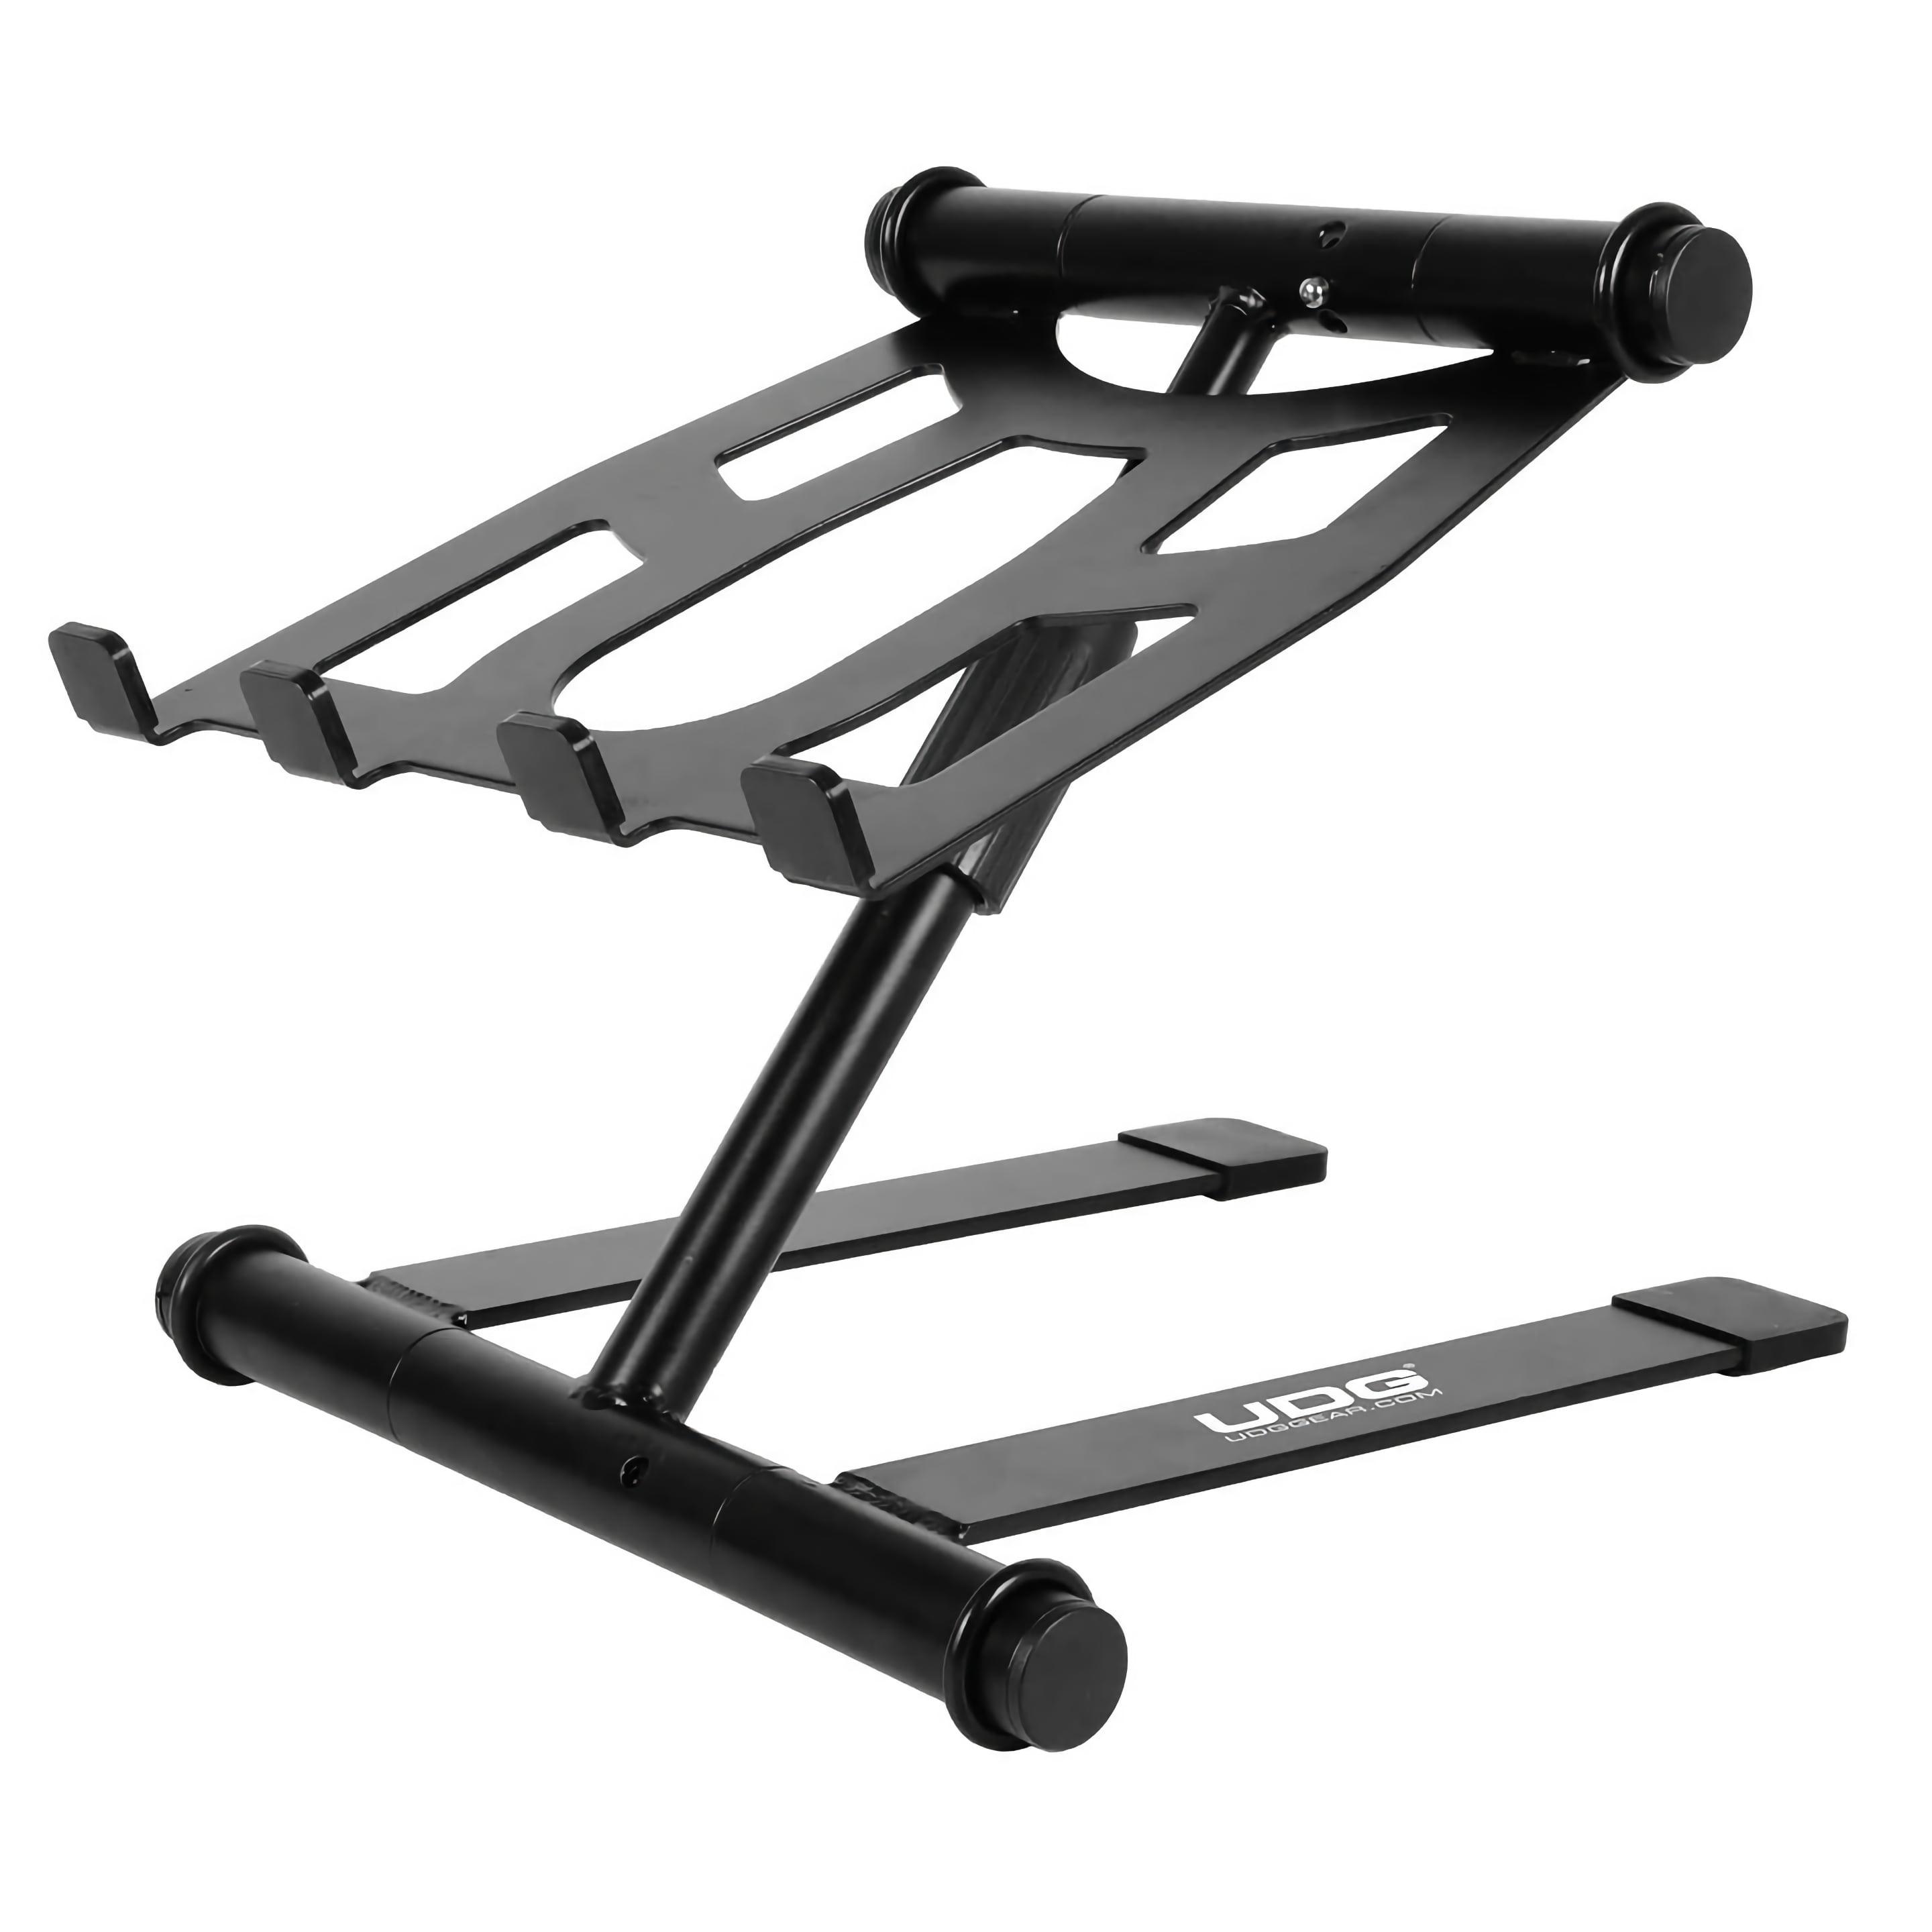 UDG Ultimate Height Adjustable Laptop Stand Black 4UDG Ultimate Height Adjustable Laptop Stand Black 4